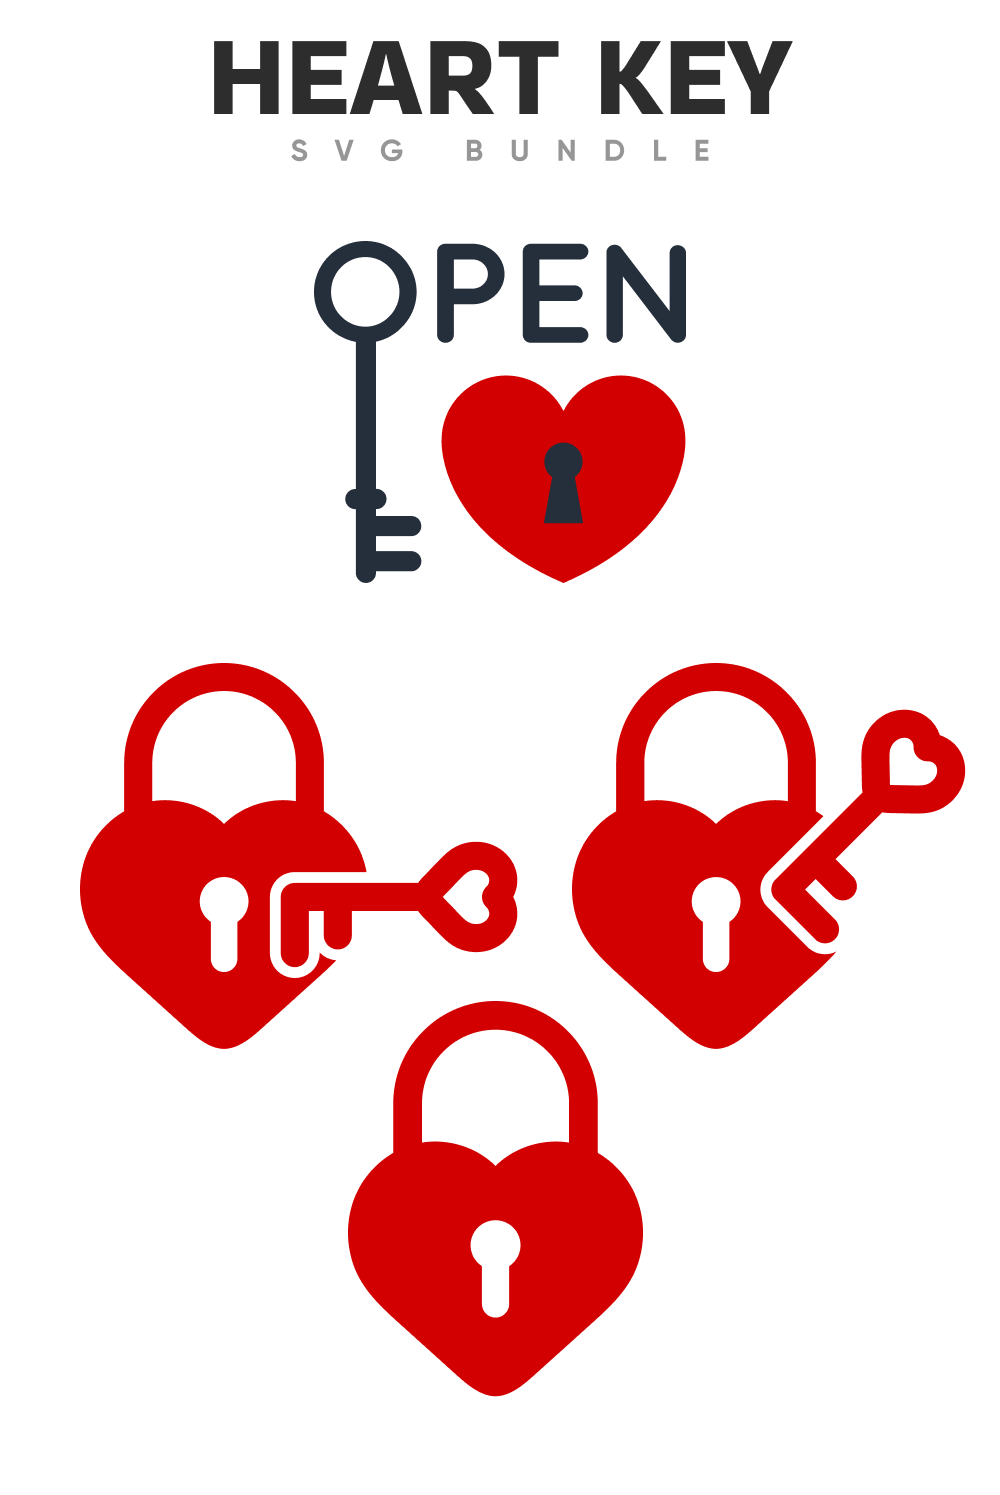 Three red and one black logos with red and black keys with red heart locks.